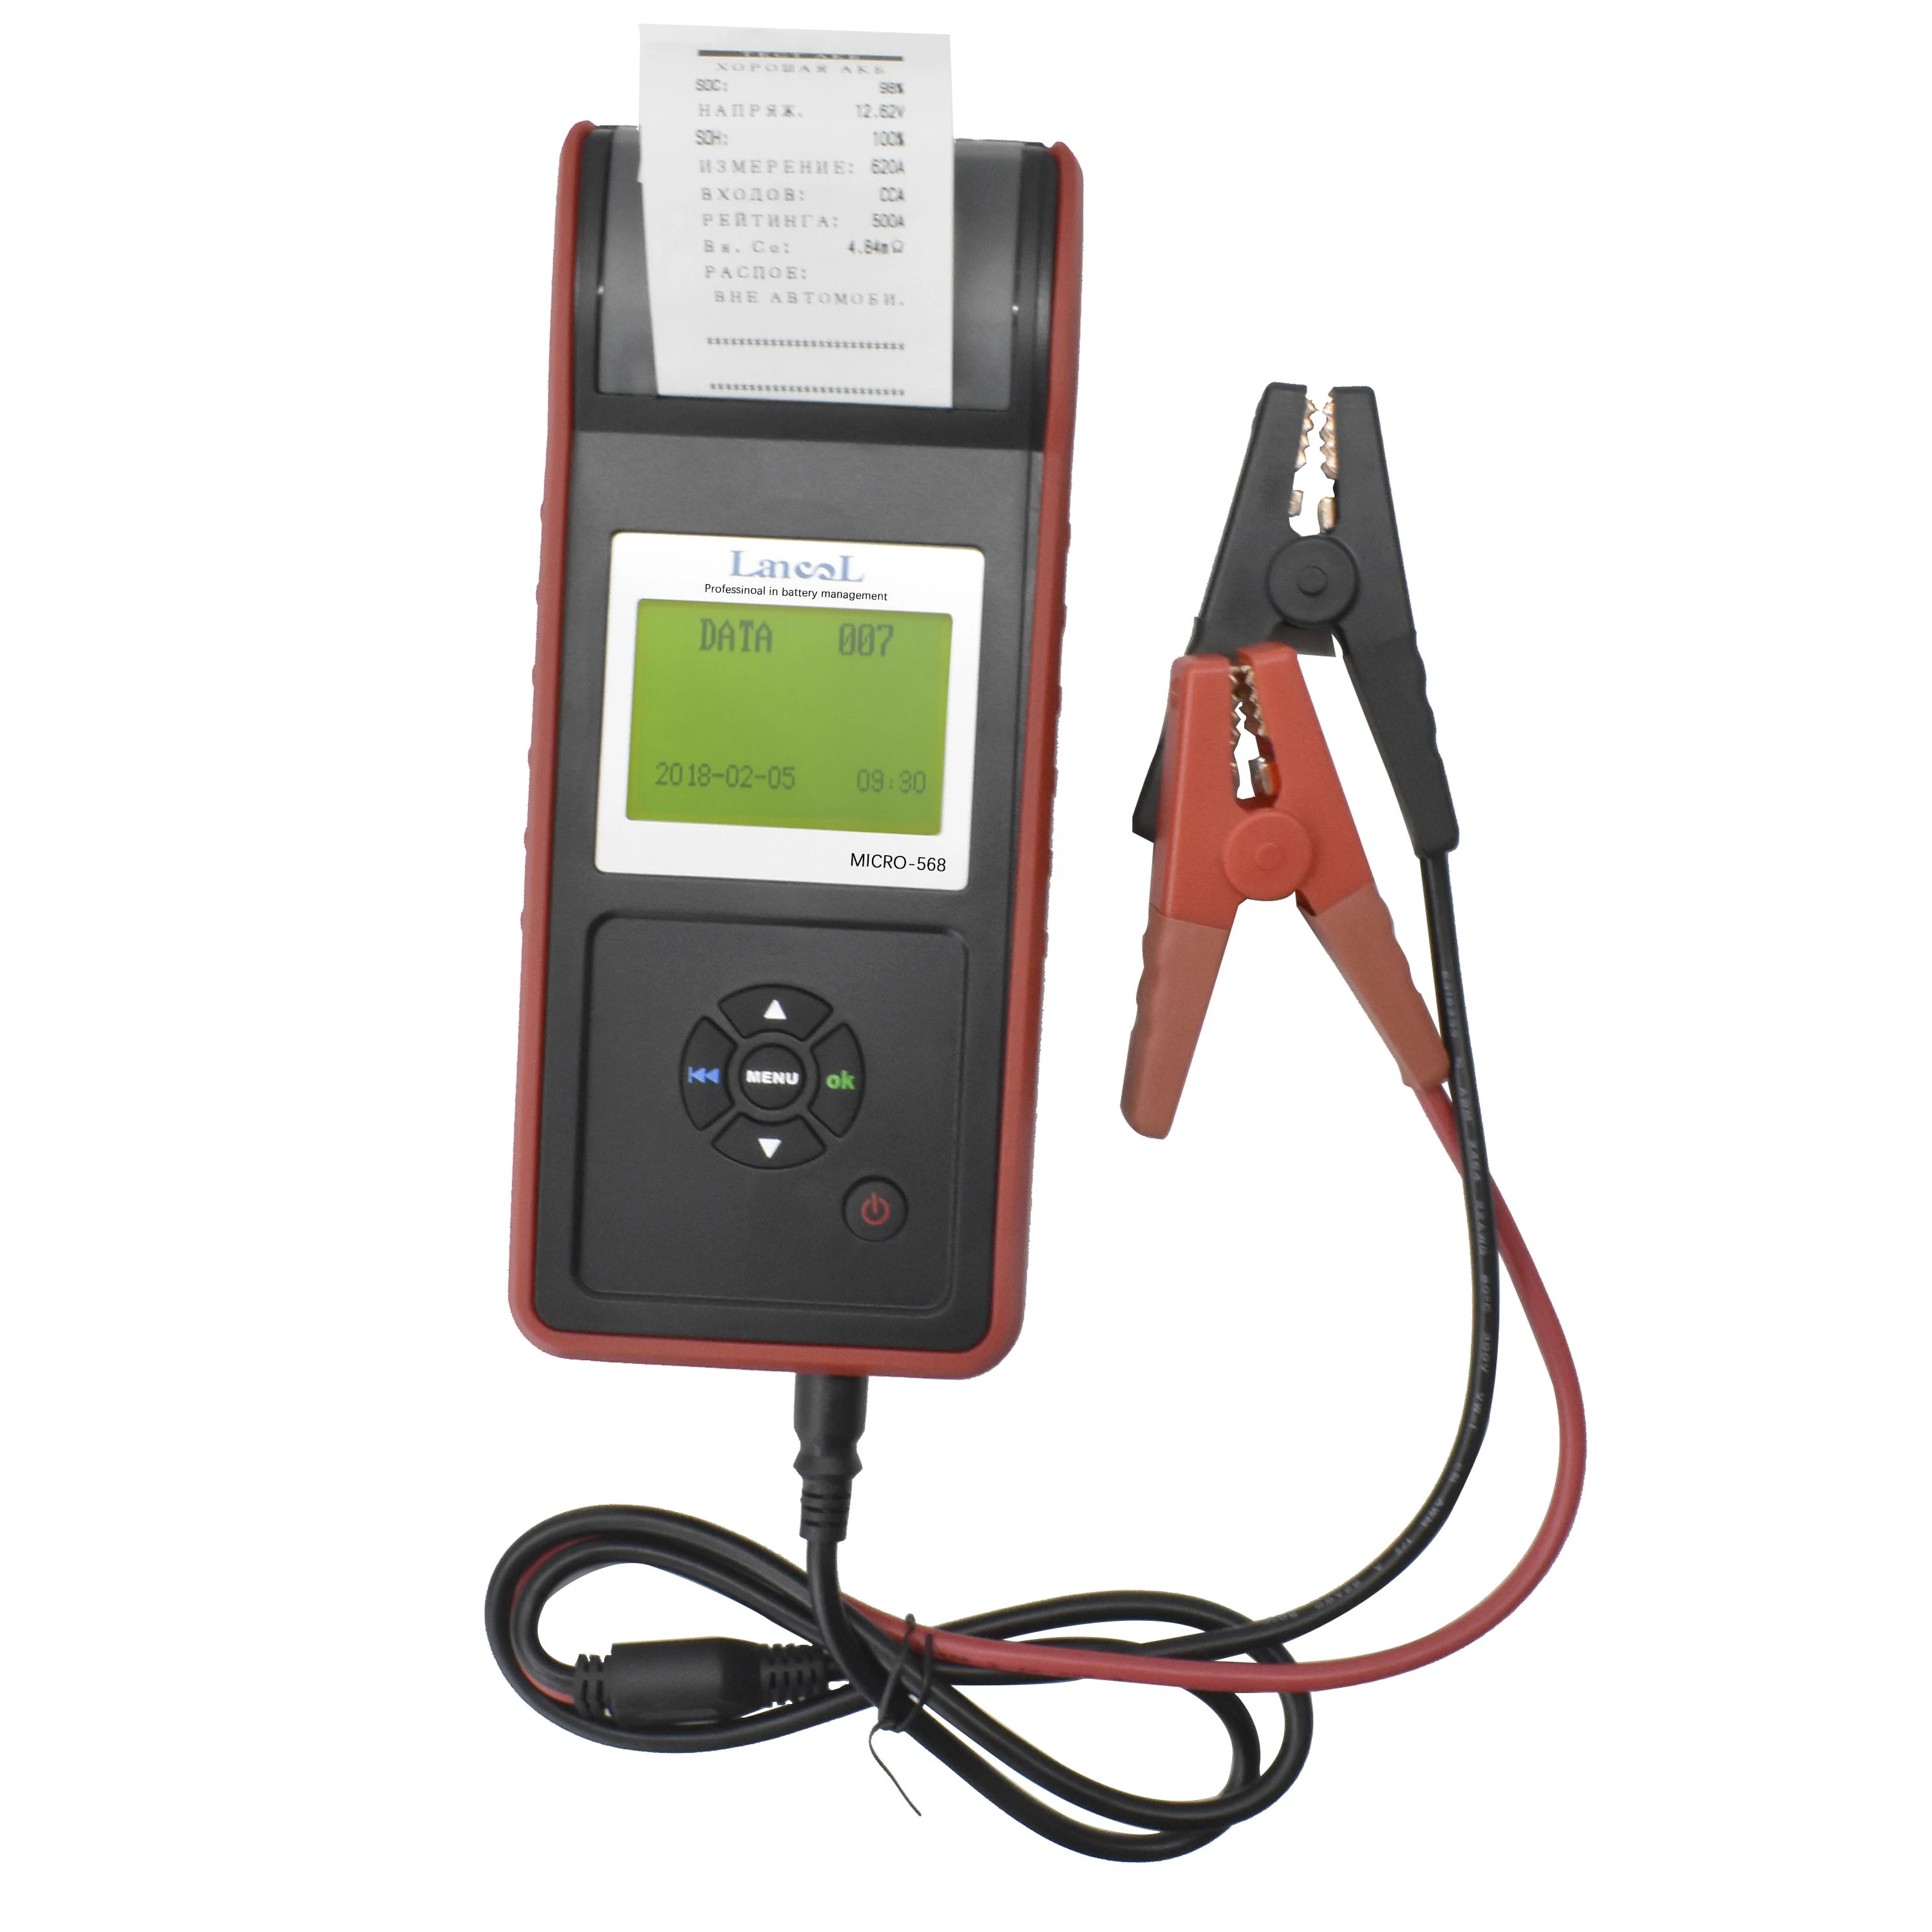 

12v Battery Capacity Tester Auto Meter MICRO 568 With Printer Change Language